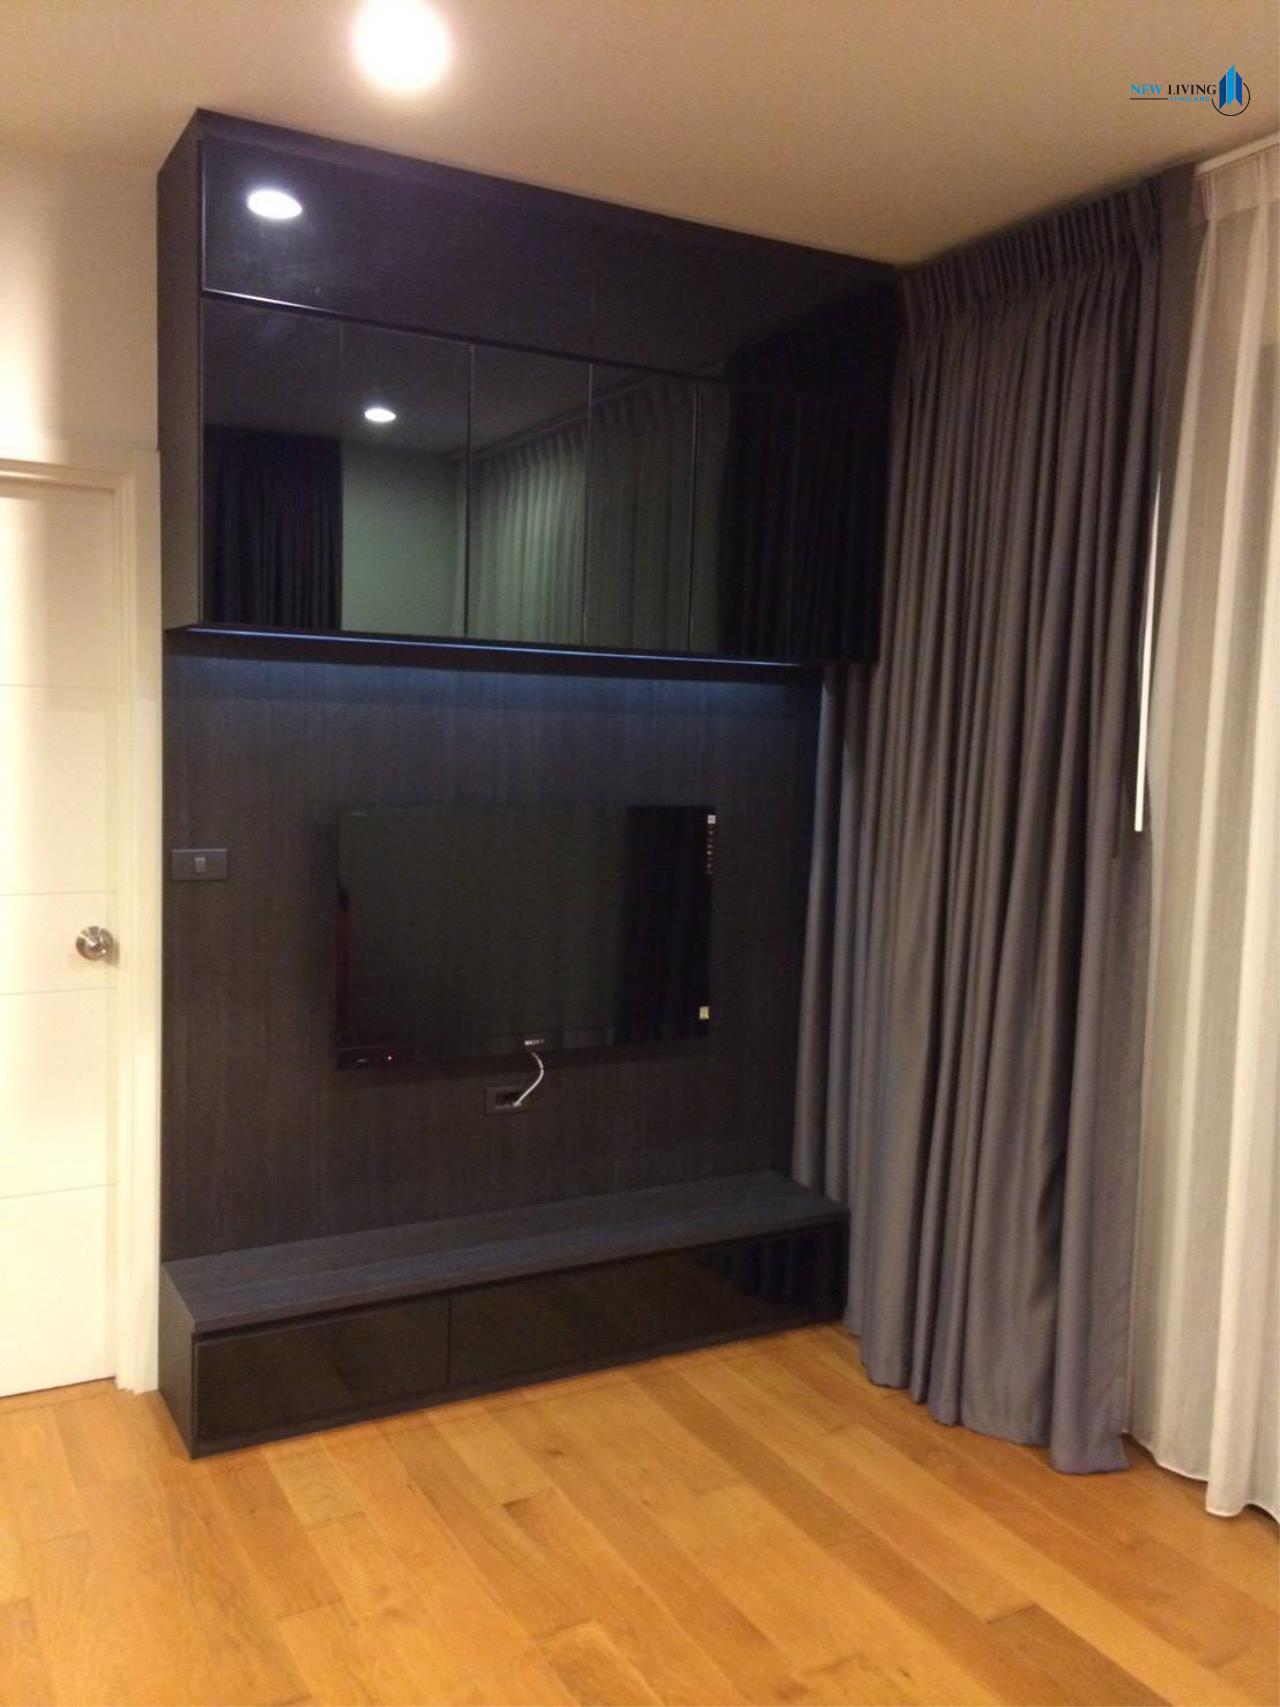 New Living Thailand Agency's Urgent sale, good price, The VERTICAL AREE ** 1 bedroom 51 sq.m. high floor, fully furnished 6